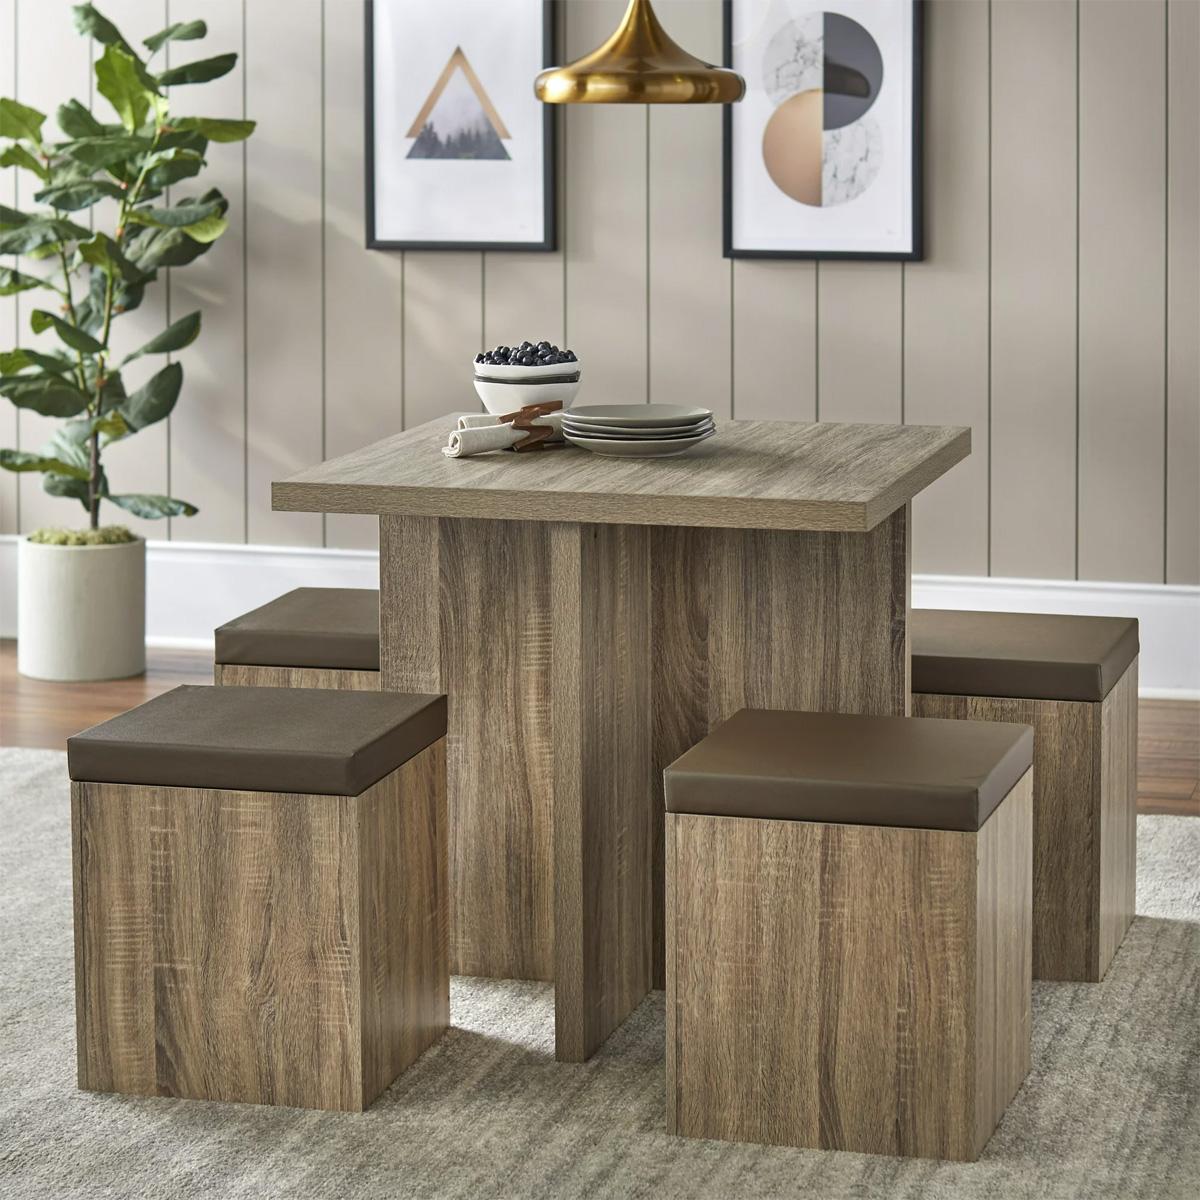 Mainstays 5-Piece Dexter Dining Room Set with Storage Ottoman for $144 Shipped